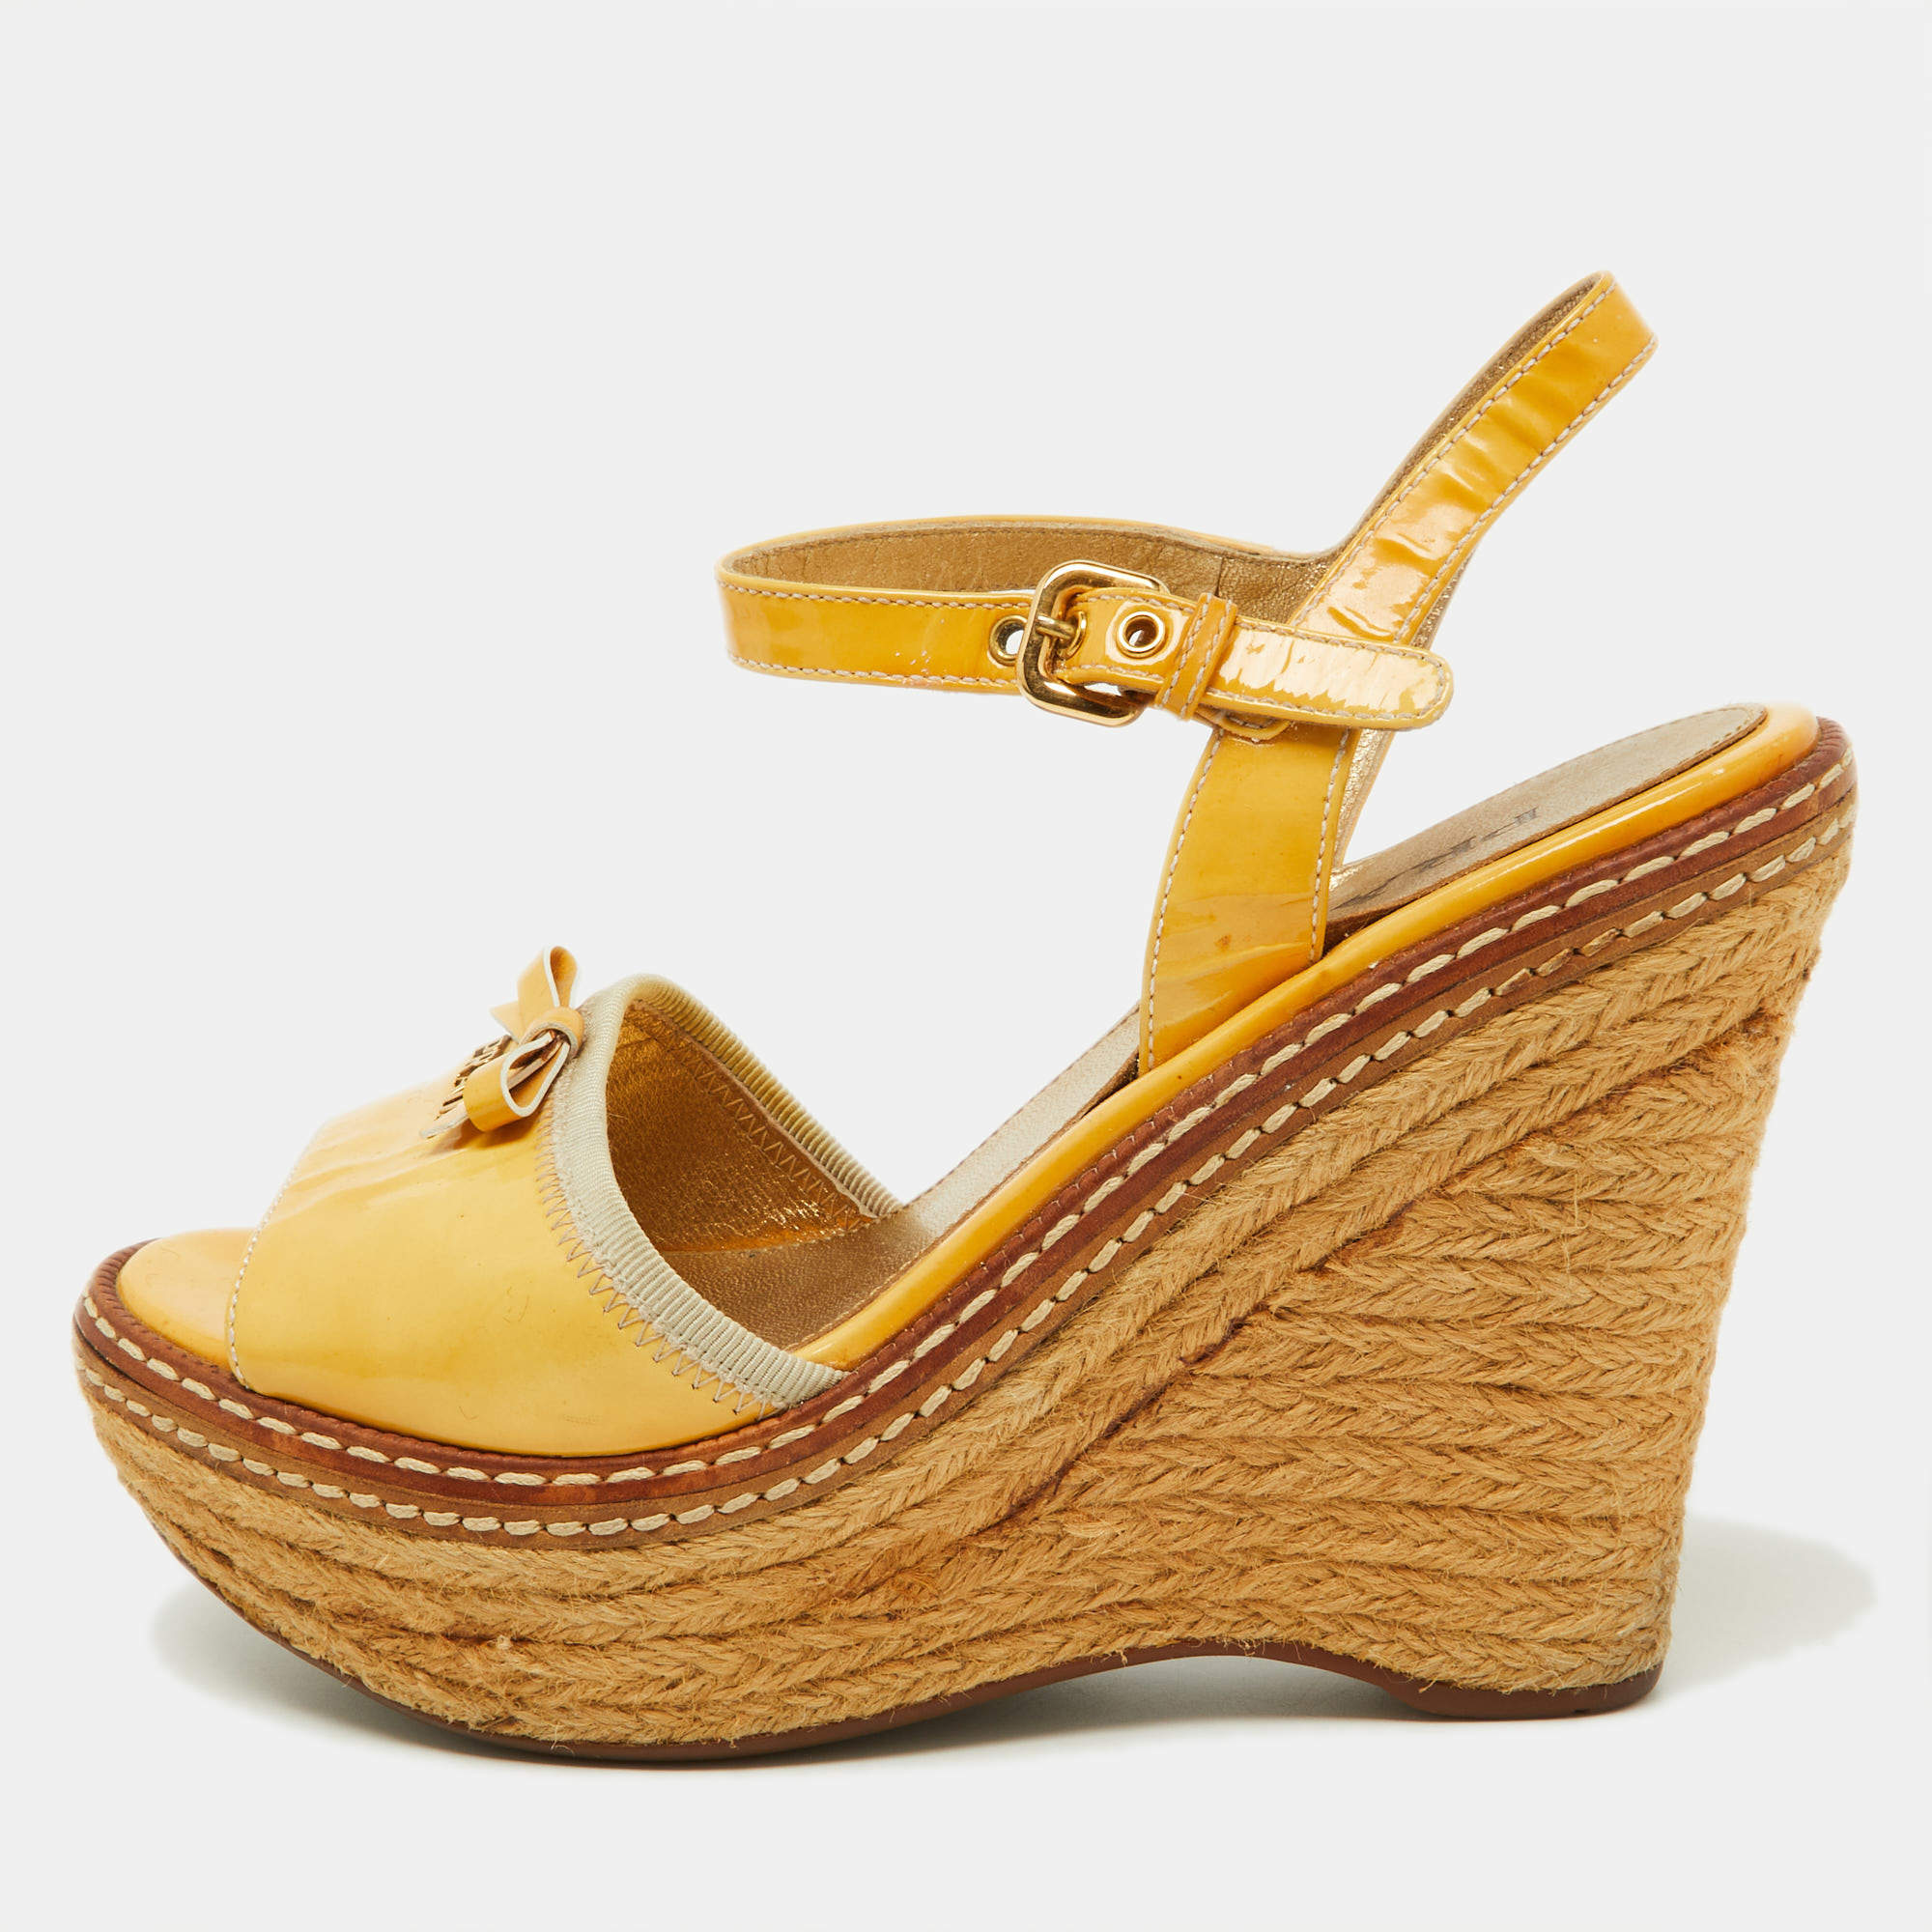 Prada Yellow Patent Leather Bow Espadrille Wedge Platform Ankle Strap Sandals Size 35.5